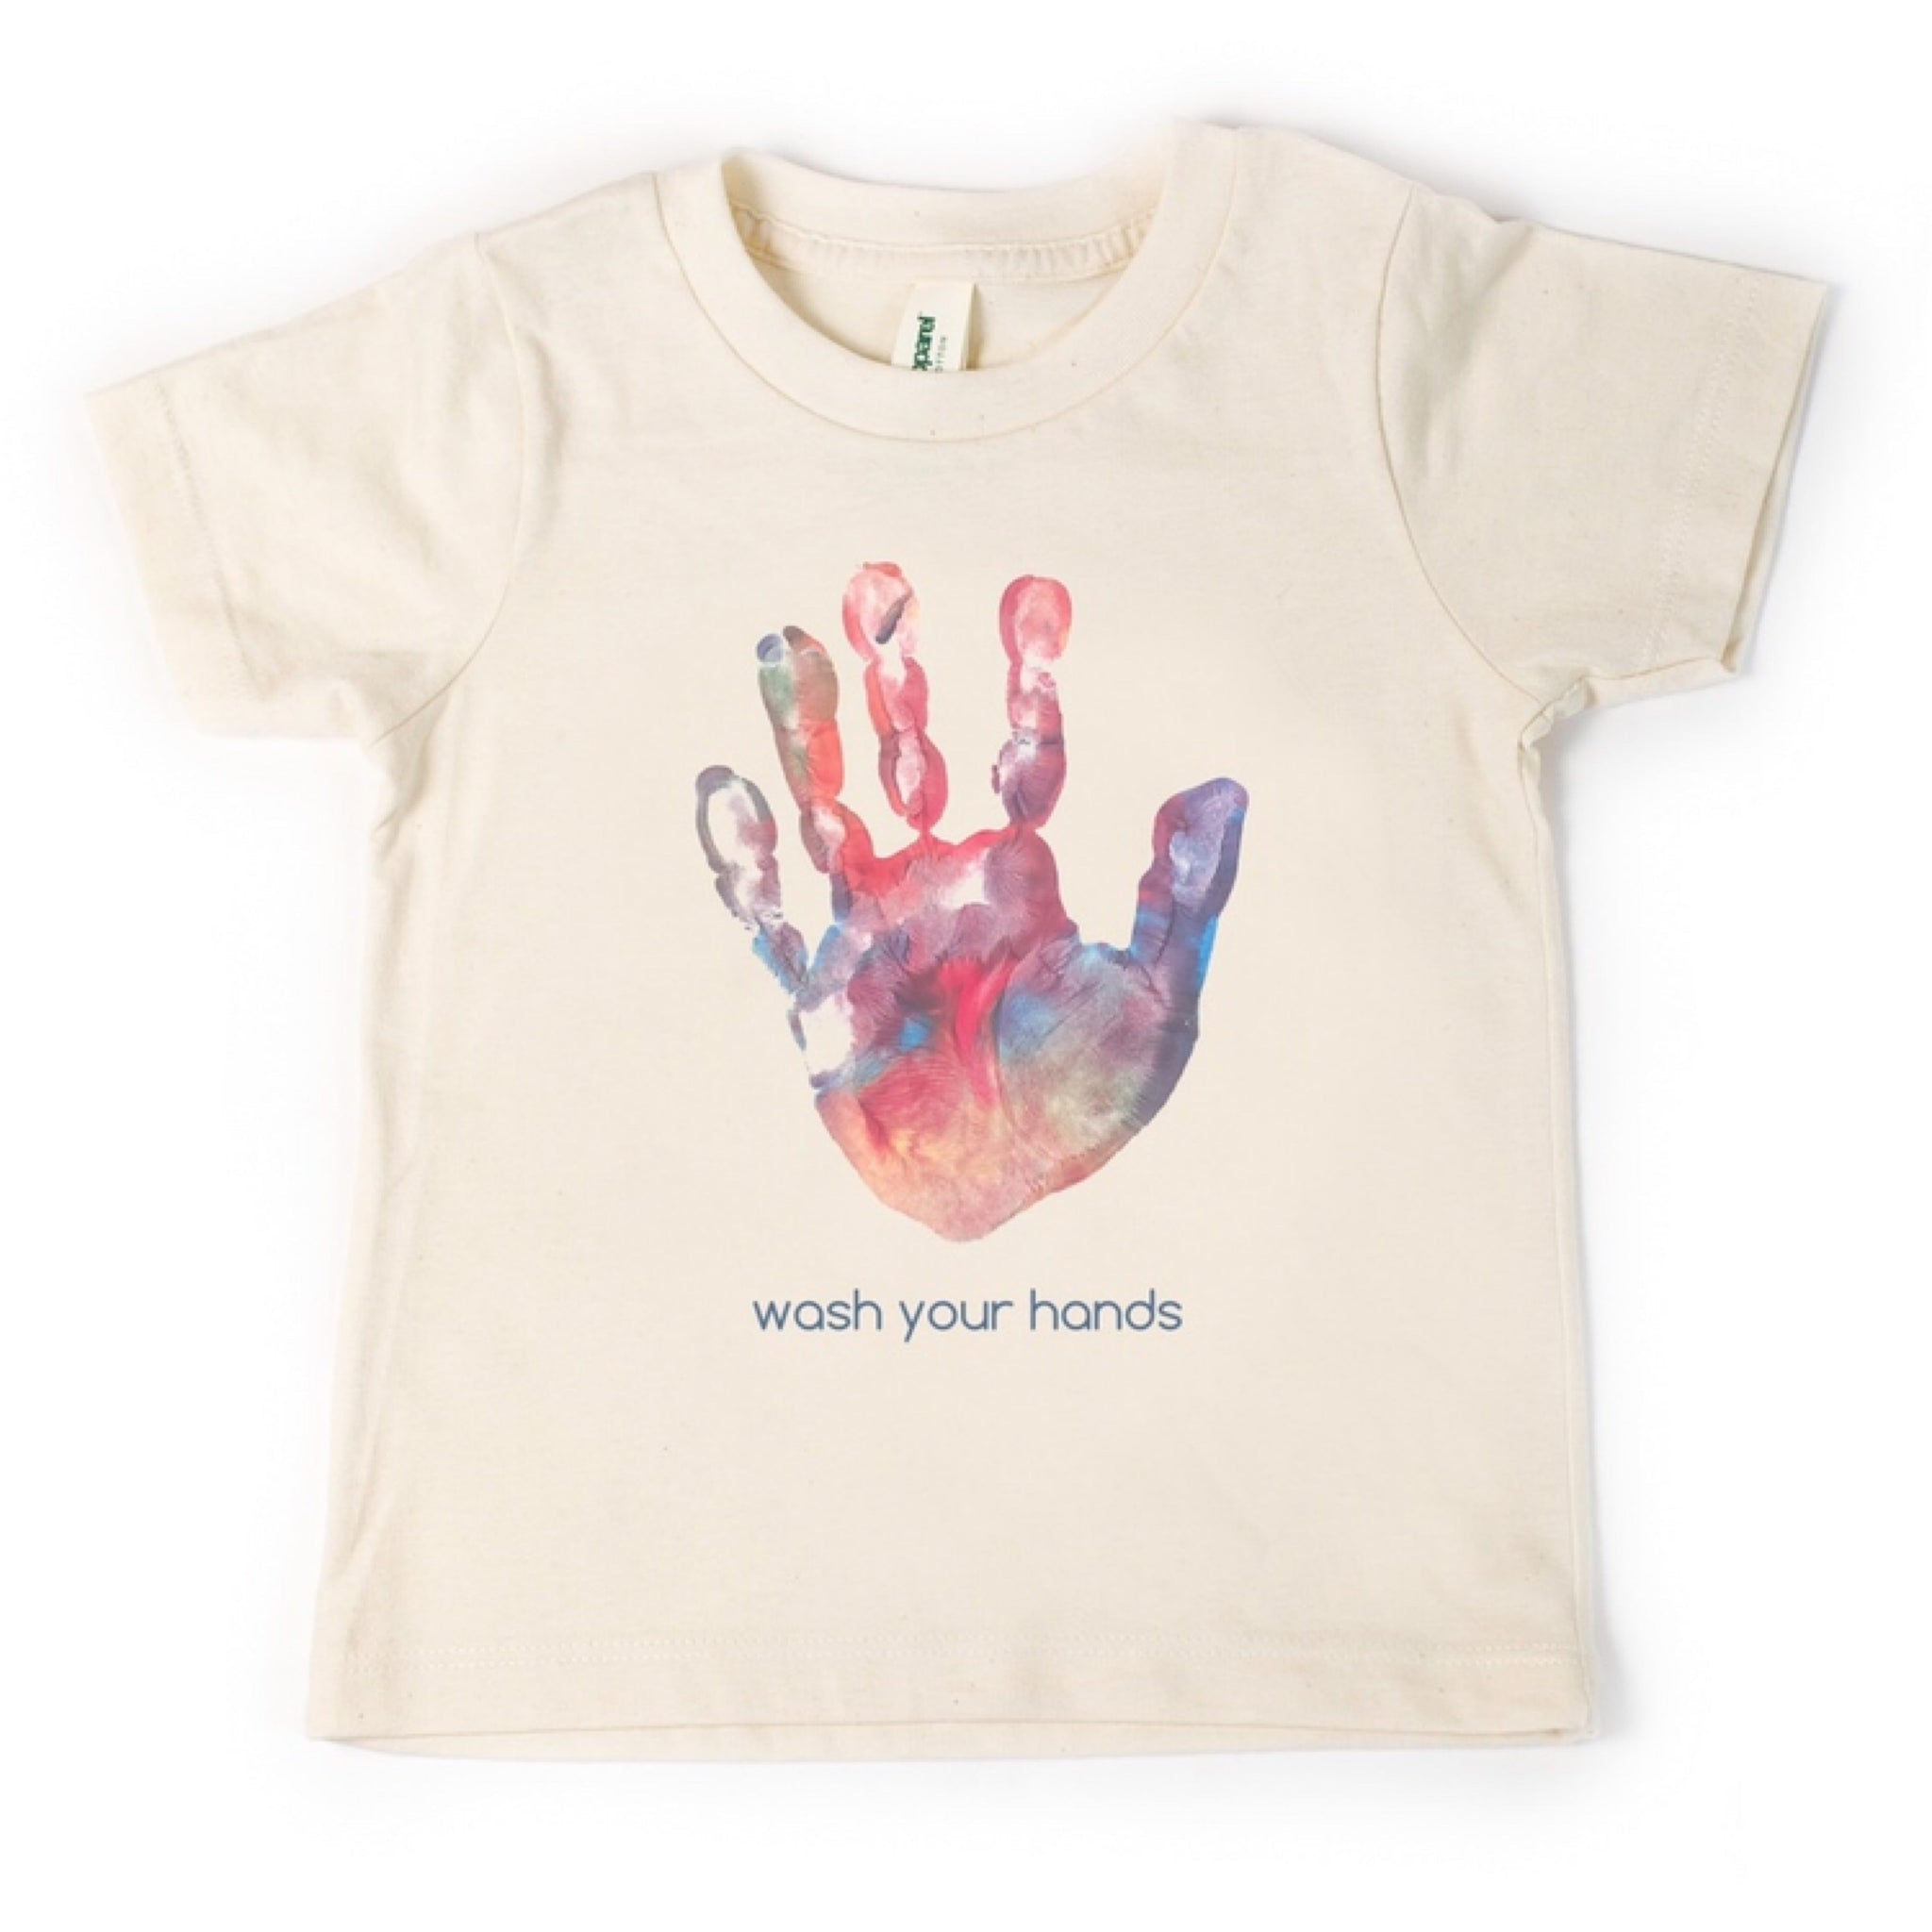 Wash Your Hands, Adult tshirt